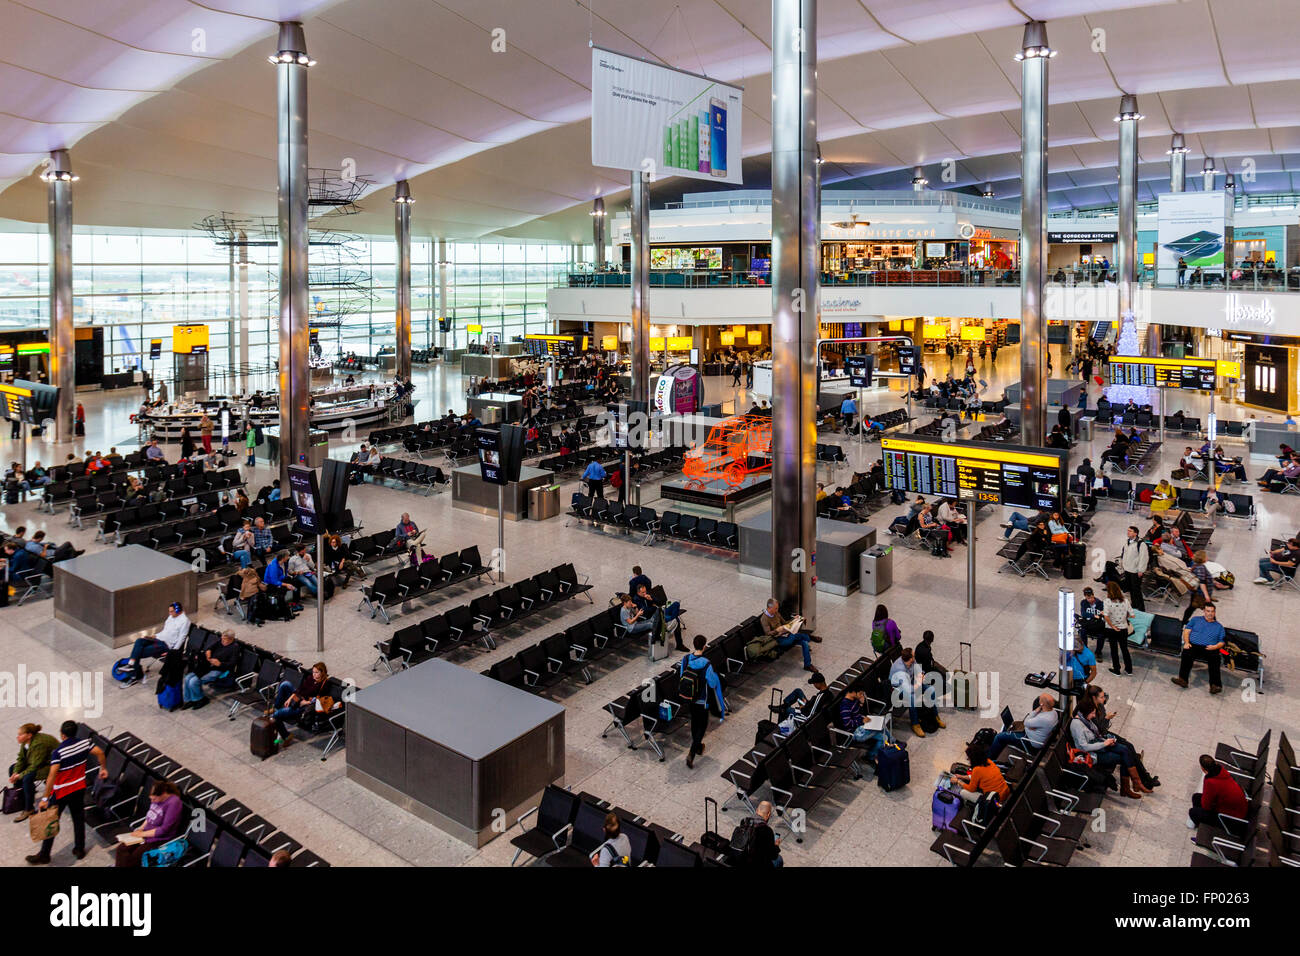 The Departure Lounge At London Heathrow Airport (Terminal 2), London, England Stock Photo